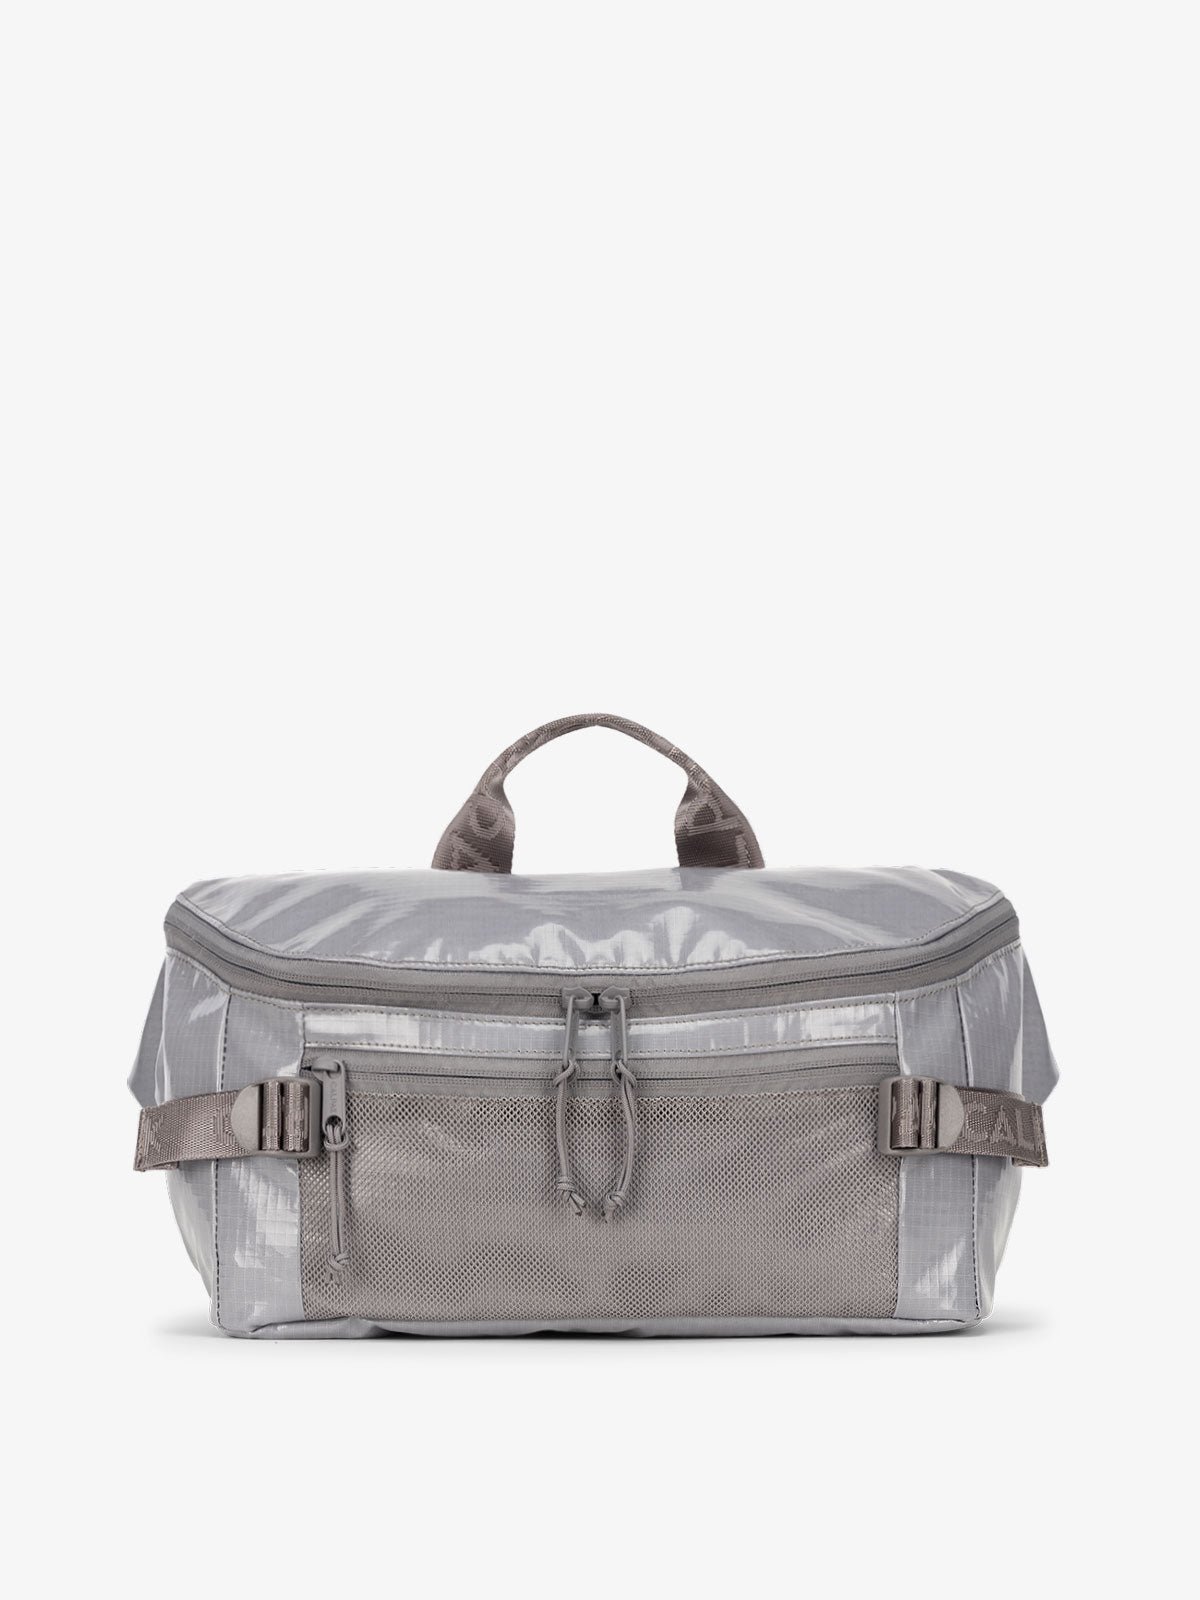 CALPAK Terra Sling Bag with mesh front pocket and top handle in gray storm